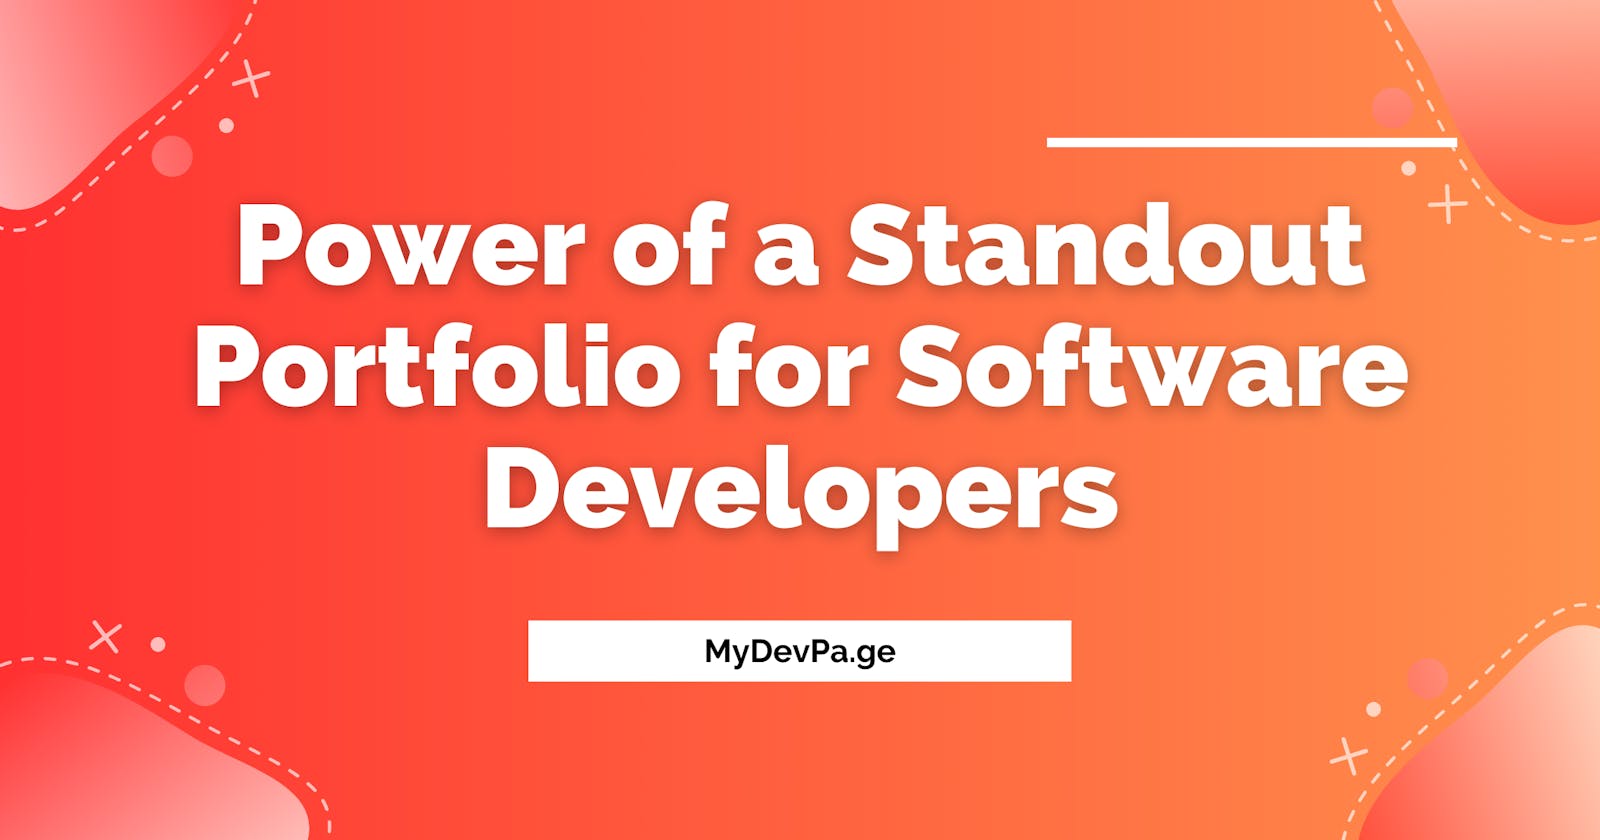 The Power of a Standout Portfolio for Software Developers